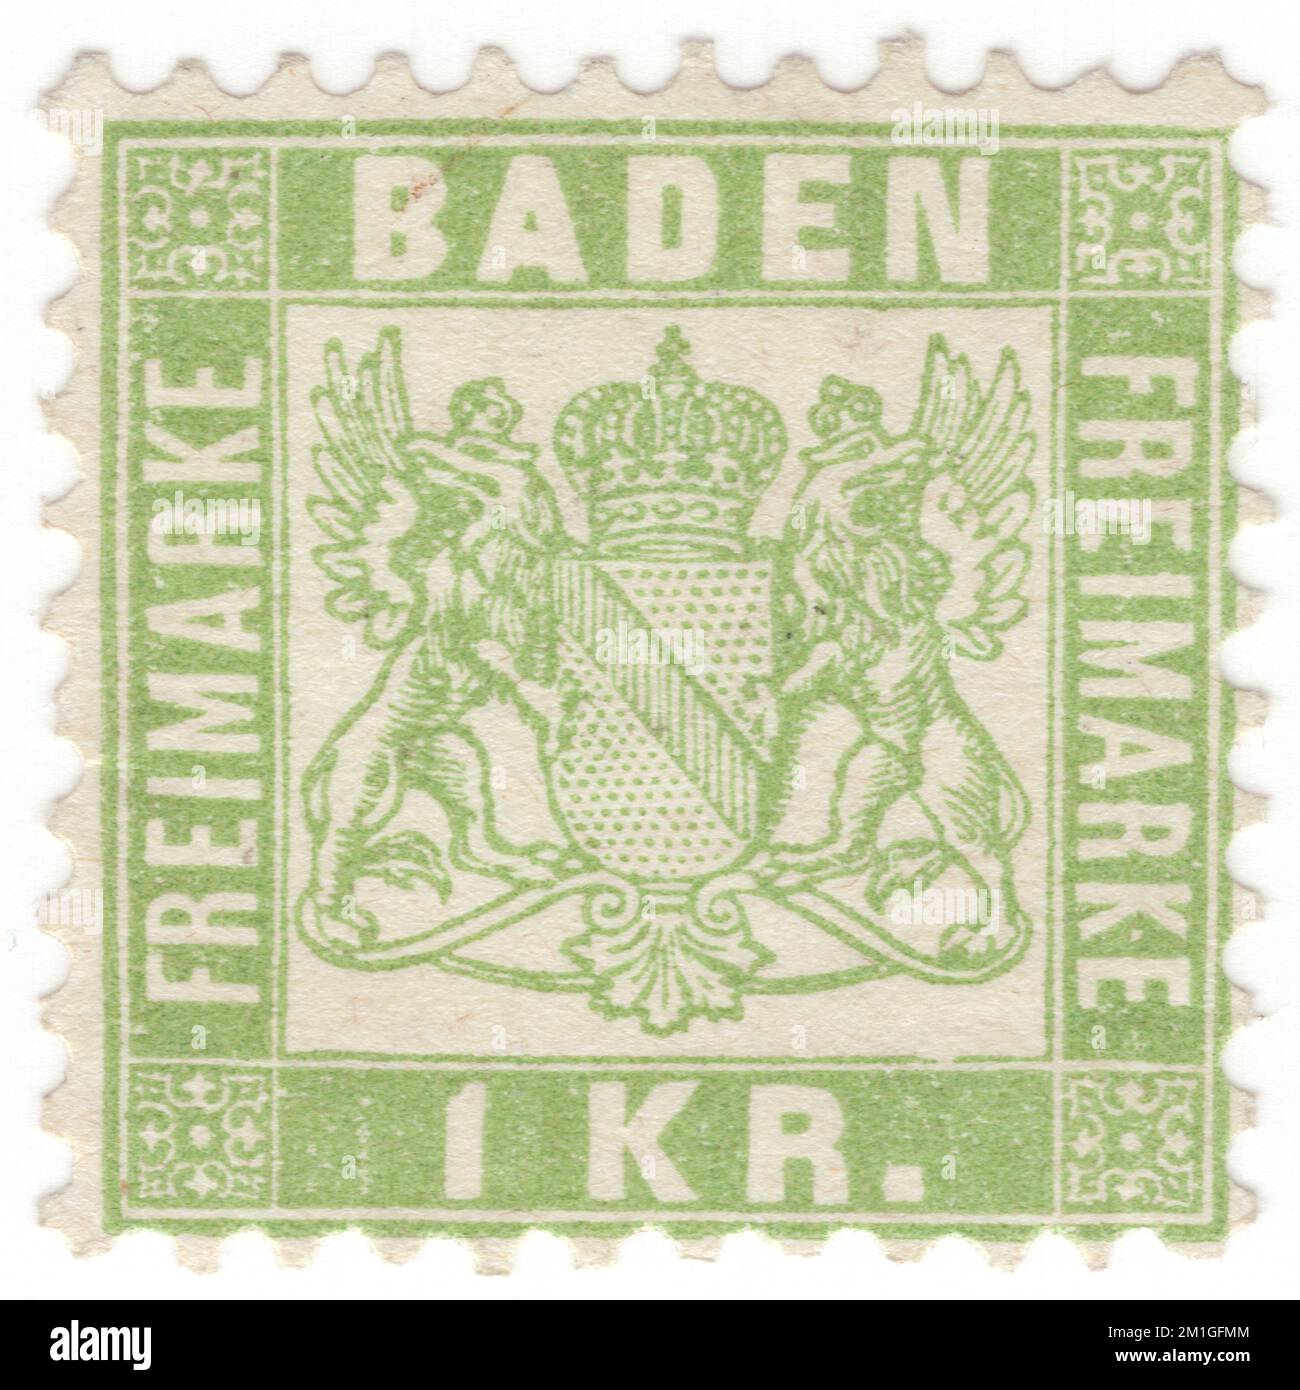 BADEN — 1868: 1 kreuzer green postage stamp showing numeral and ornament. Baden was one of the German states in the south-west of Germany. Grand Duchy, capital — Karlsruhe (principal city). Baden was a member of the German Confederation. In 1870 it became part of the German Empire. 60 Kreuzer = 1 Gulden Stock Photo